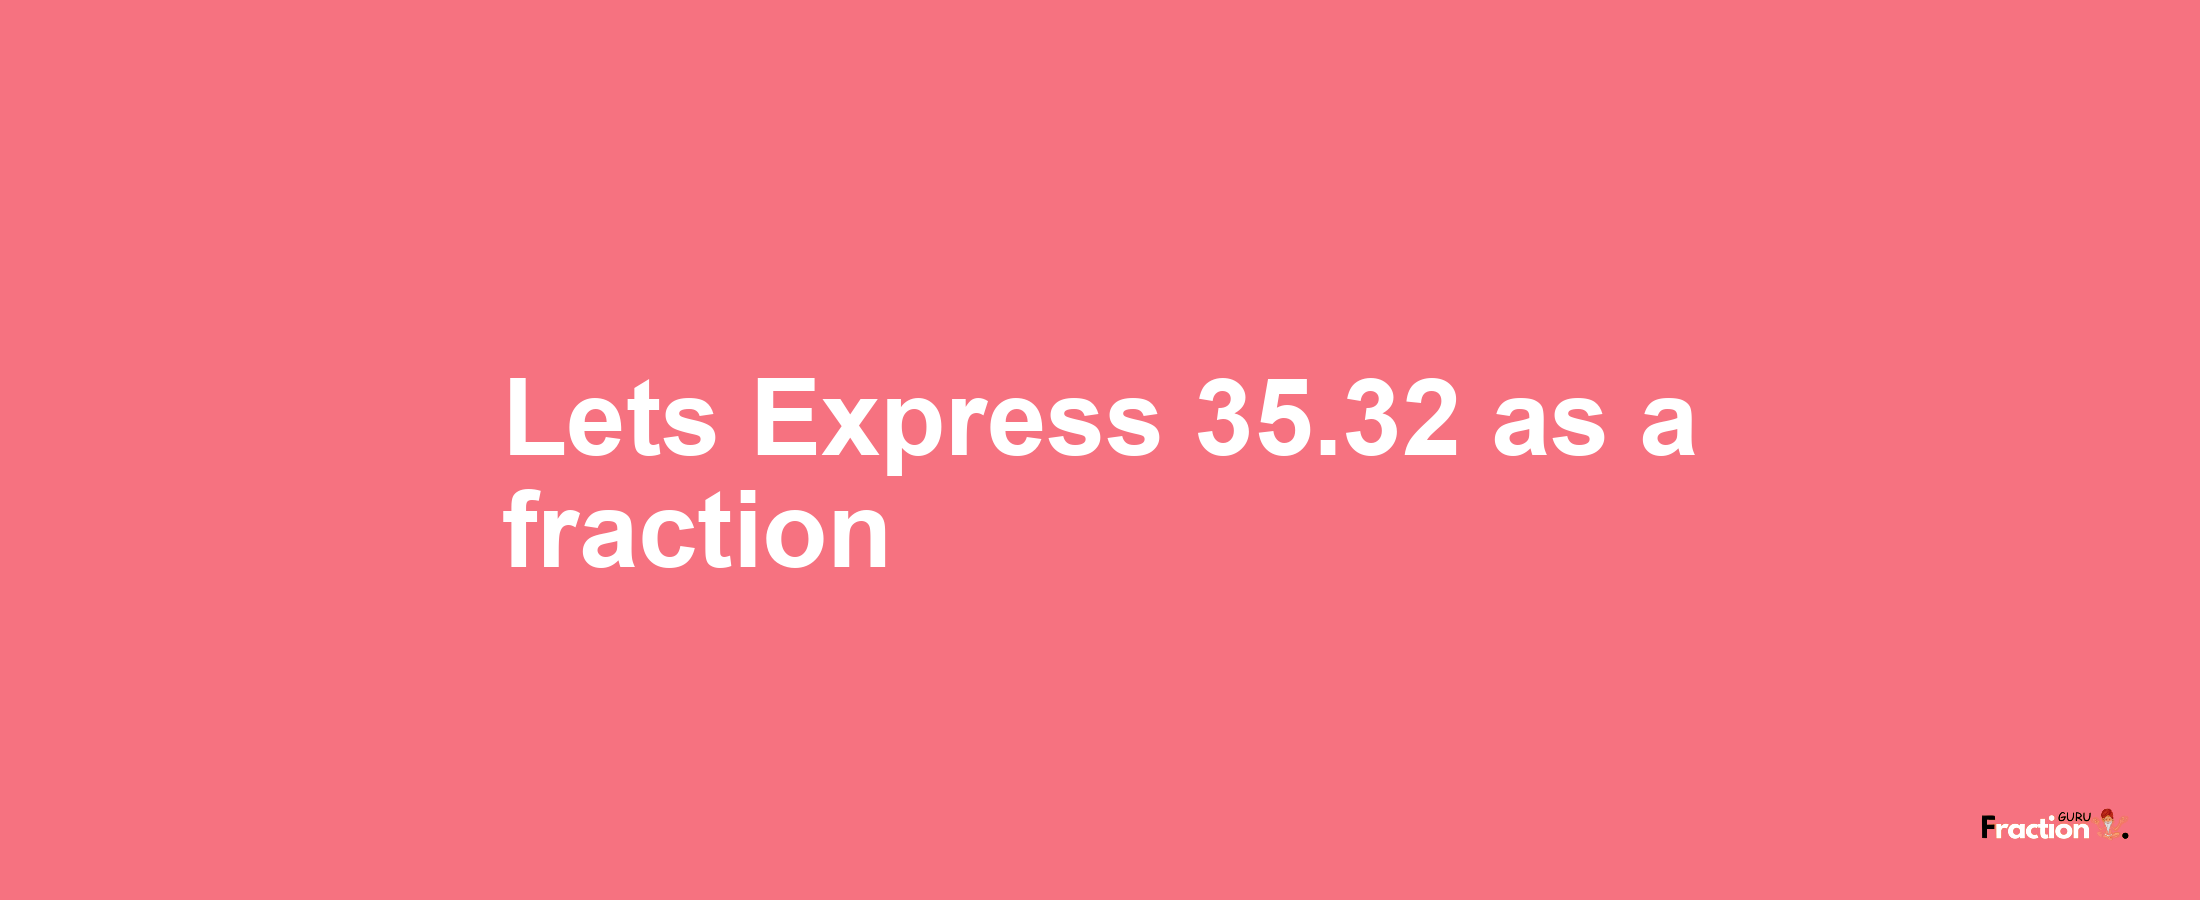 Lets Express 35.32 as afraction